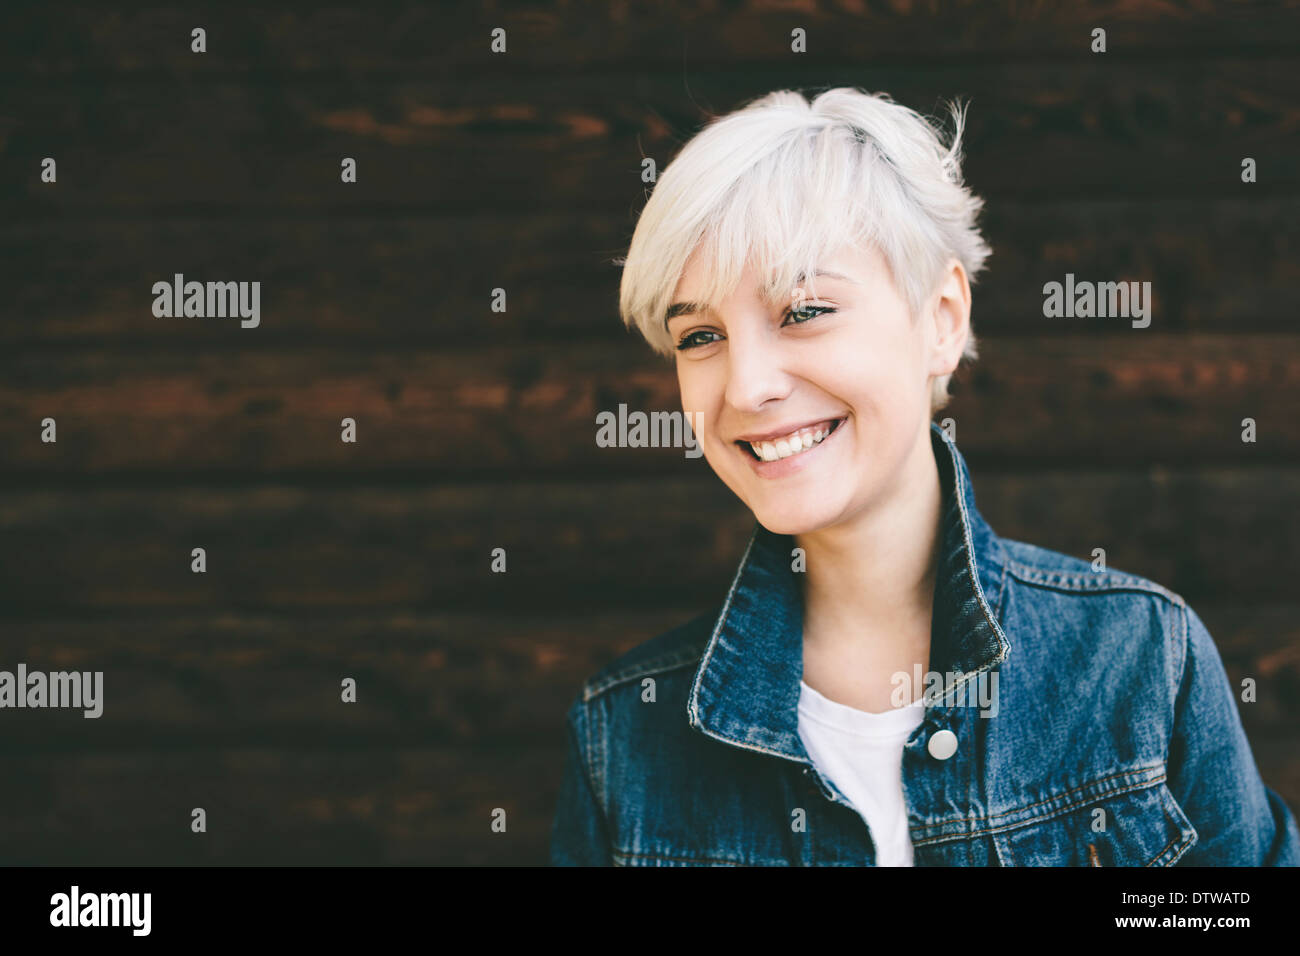 smiling happy real blond young woman Stock Photo